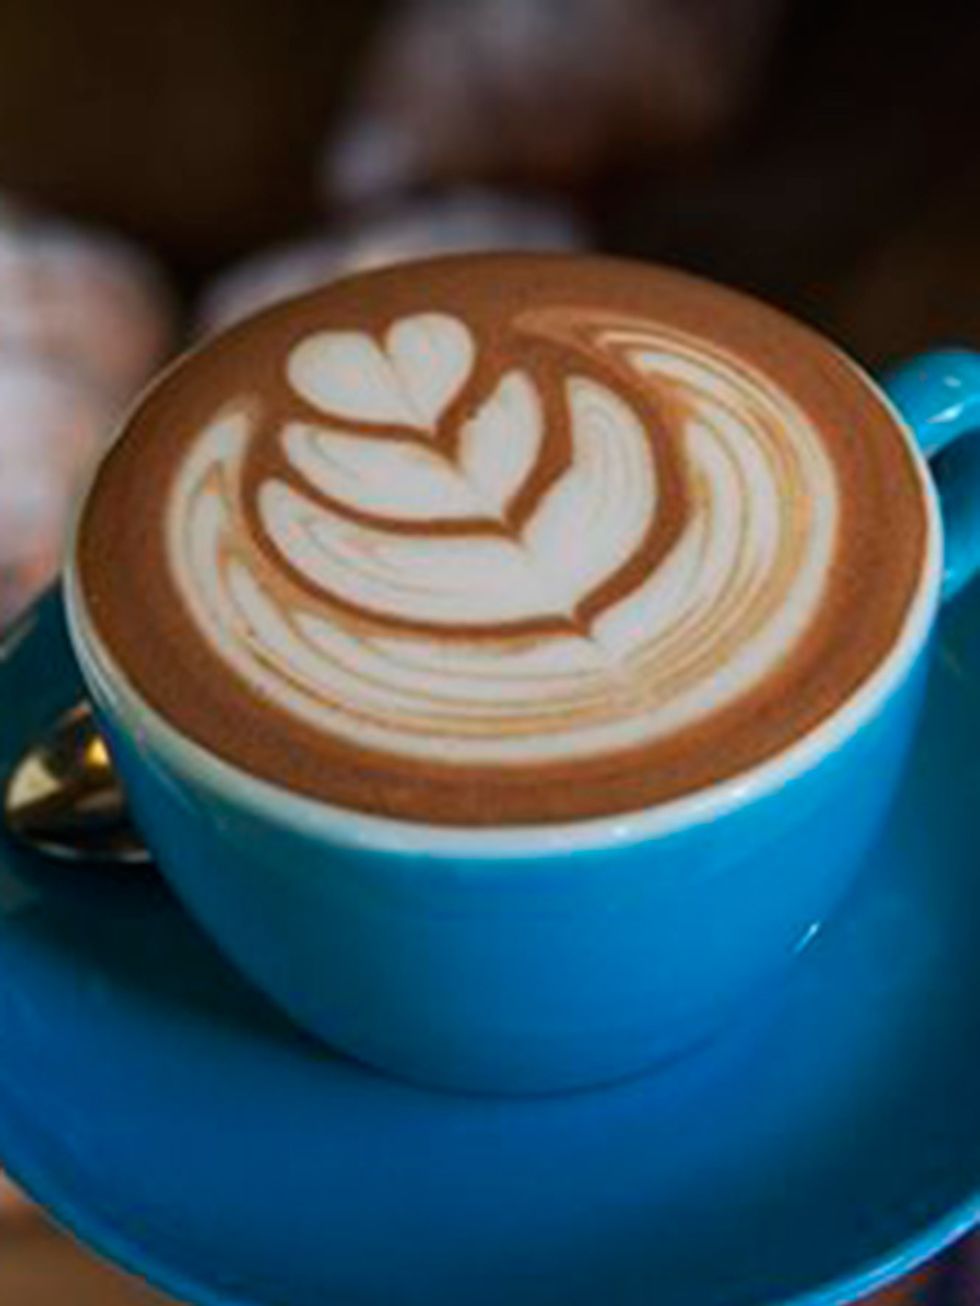 <p>DRINK: The London Coffee Festival</p>

<p>Ah, sweet, sweet caffeine. Giver of limitless energy, source of late-night inspiration when writing to deadline (who, us?)  and cause for a whole lot of hoopla this weekend when the <a href="http://Londoncoffe